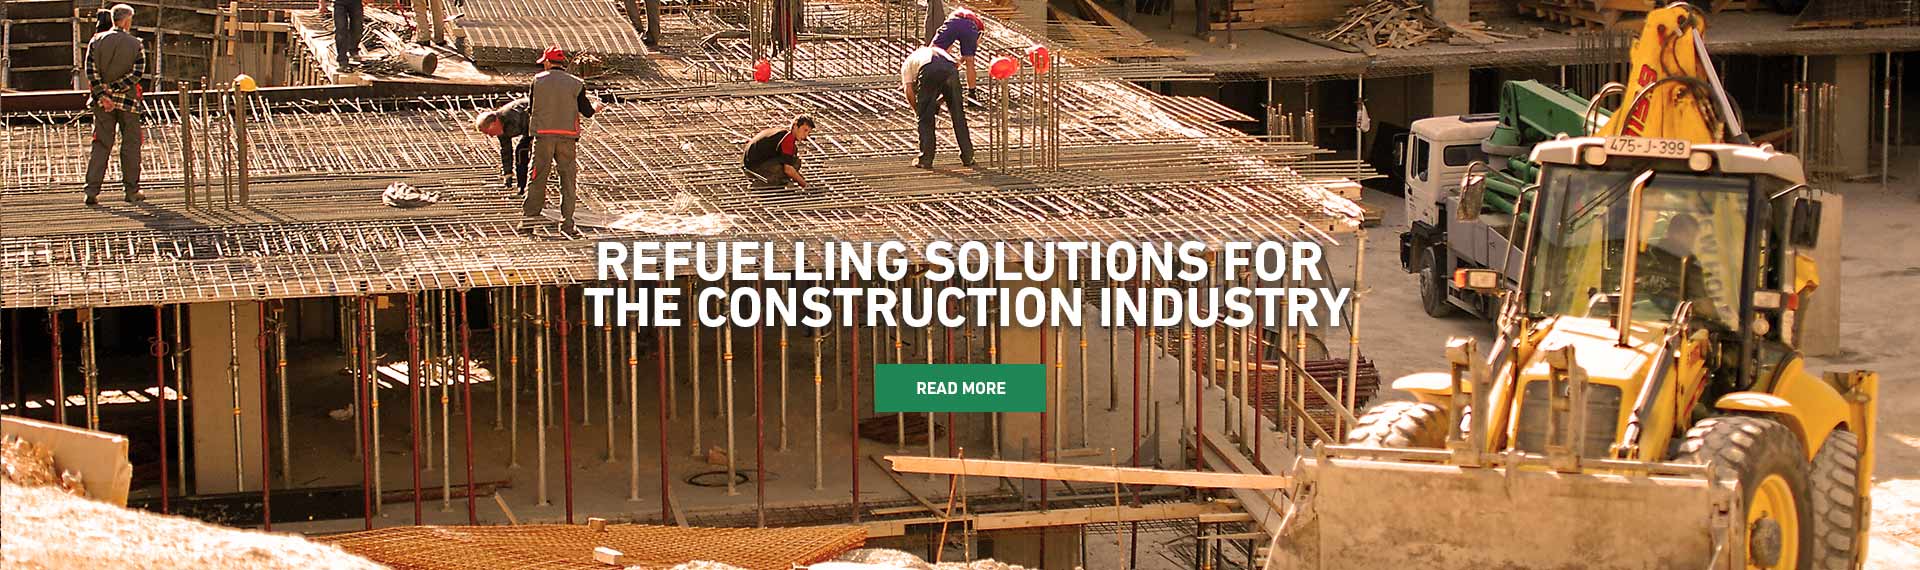 Refuelling solutions for the construction industry_EQU